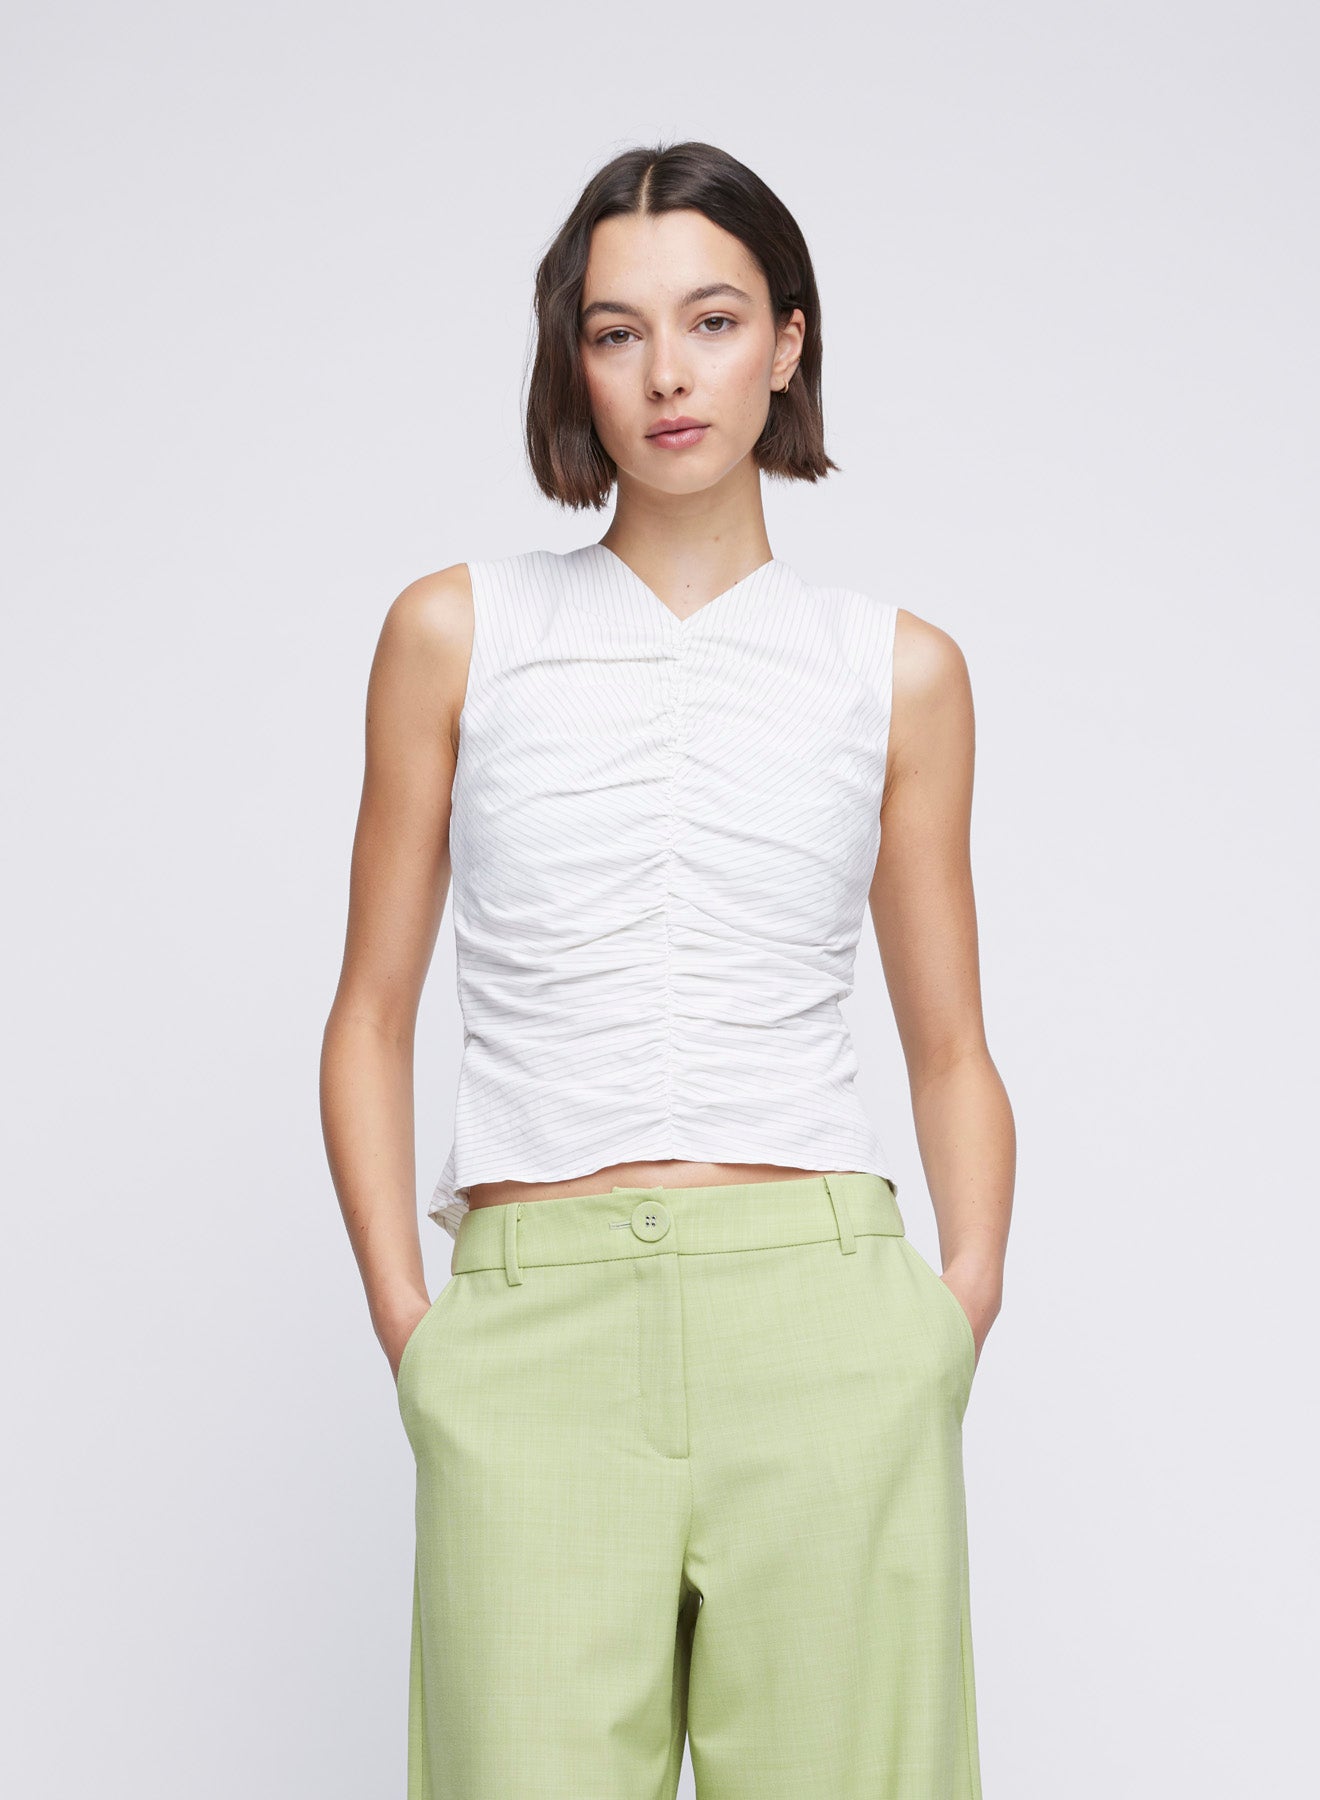 "Gathered, sleeveless top with high v neckline and zip back. Sleeveless Top, White Top, White Cotton Top, Ruched top, Cotton Top, Easy to wear tops "